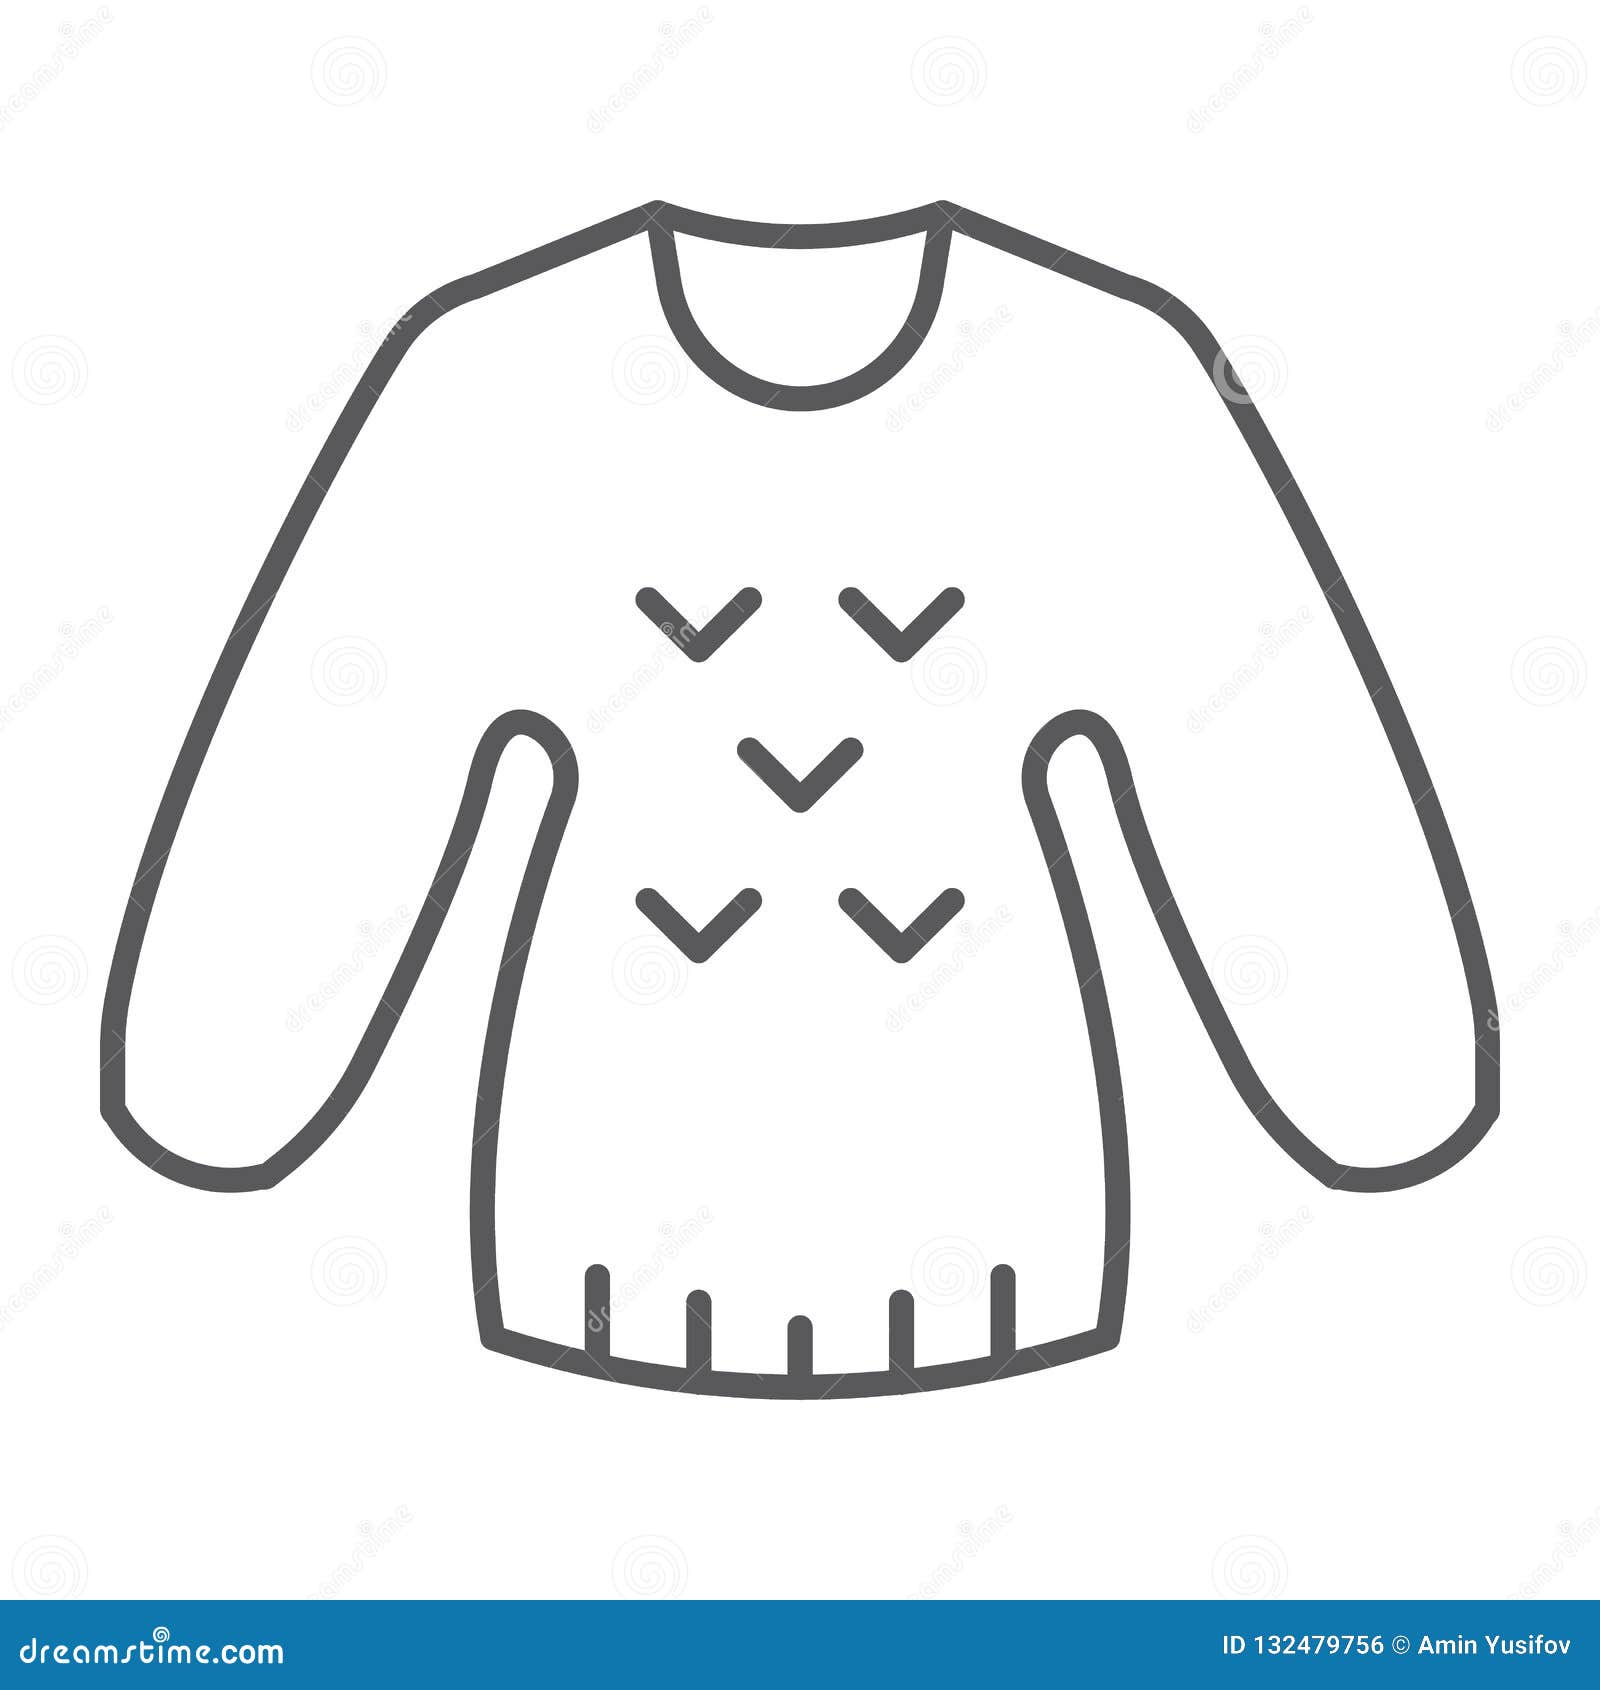 Black and White Sweater Clip Art - Black and White Sweater Image